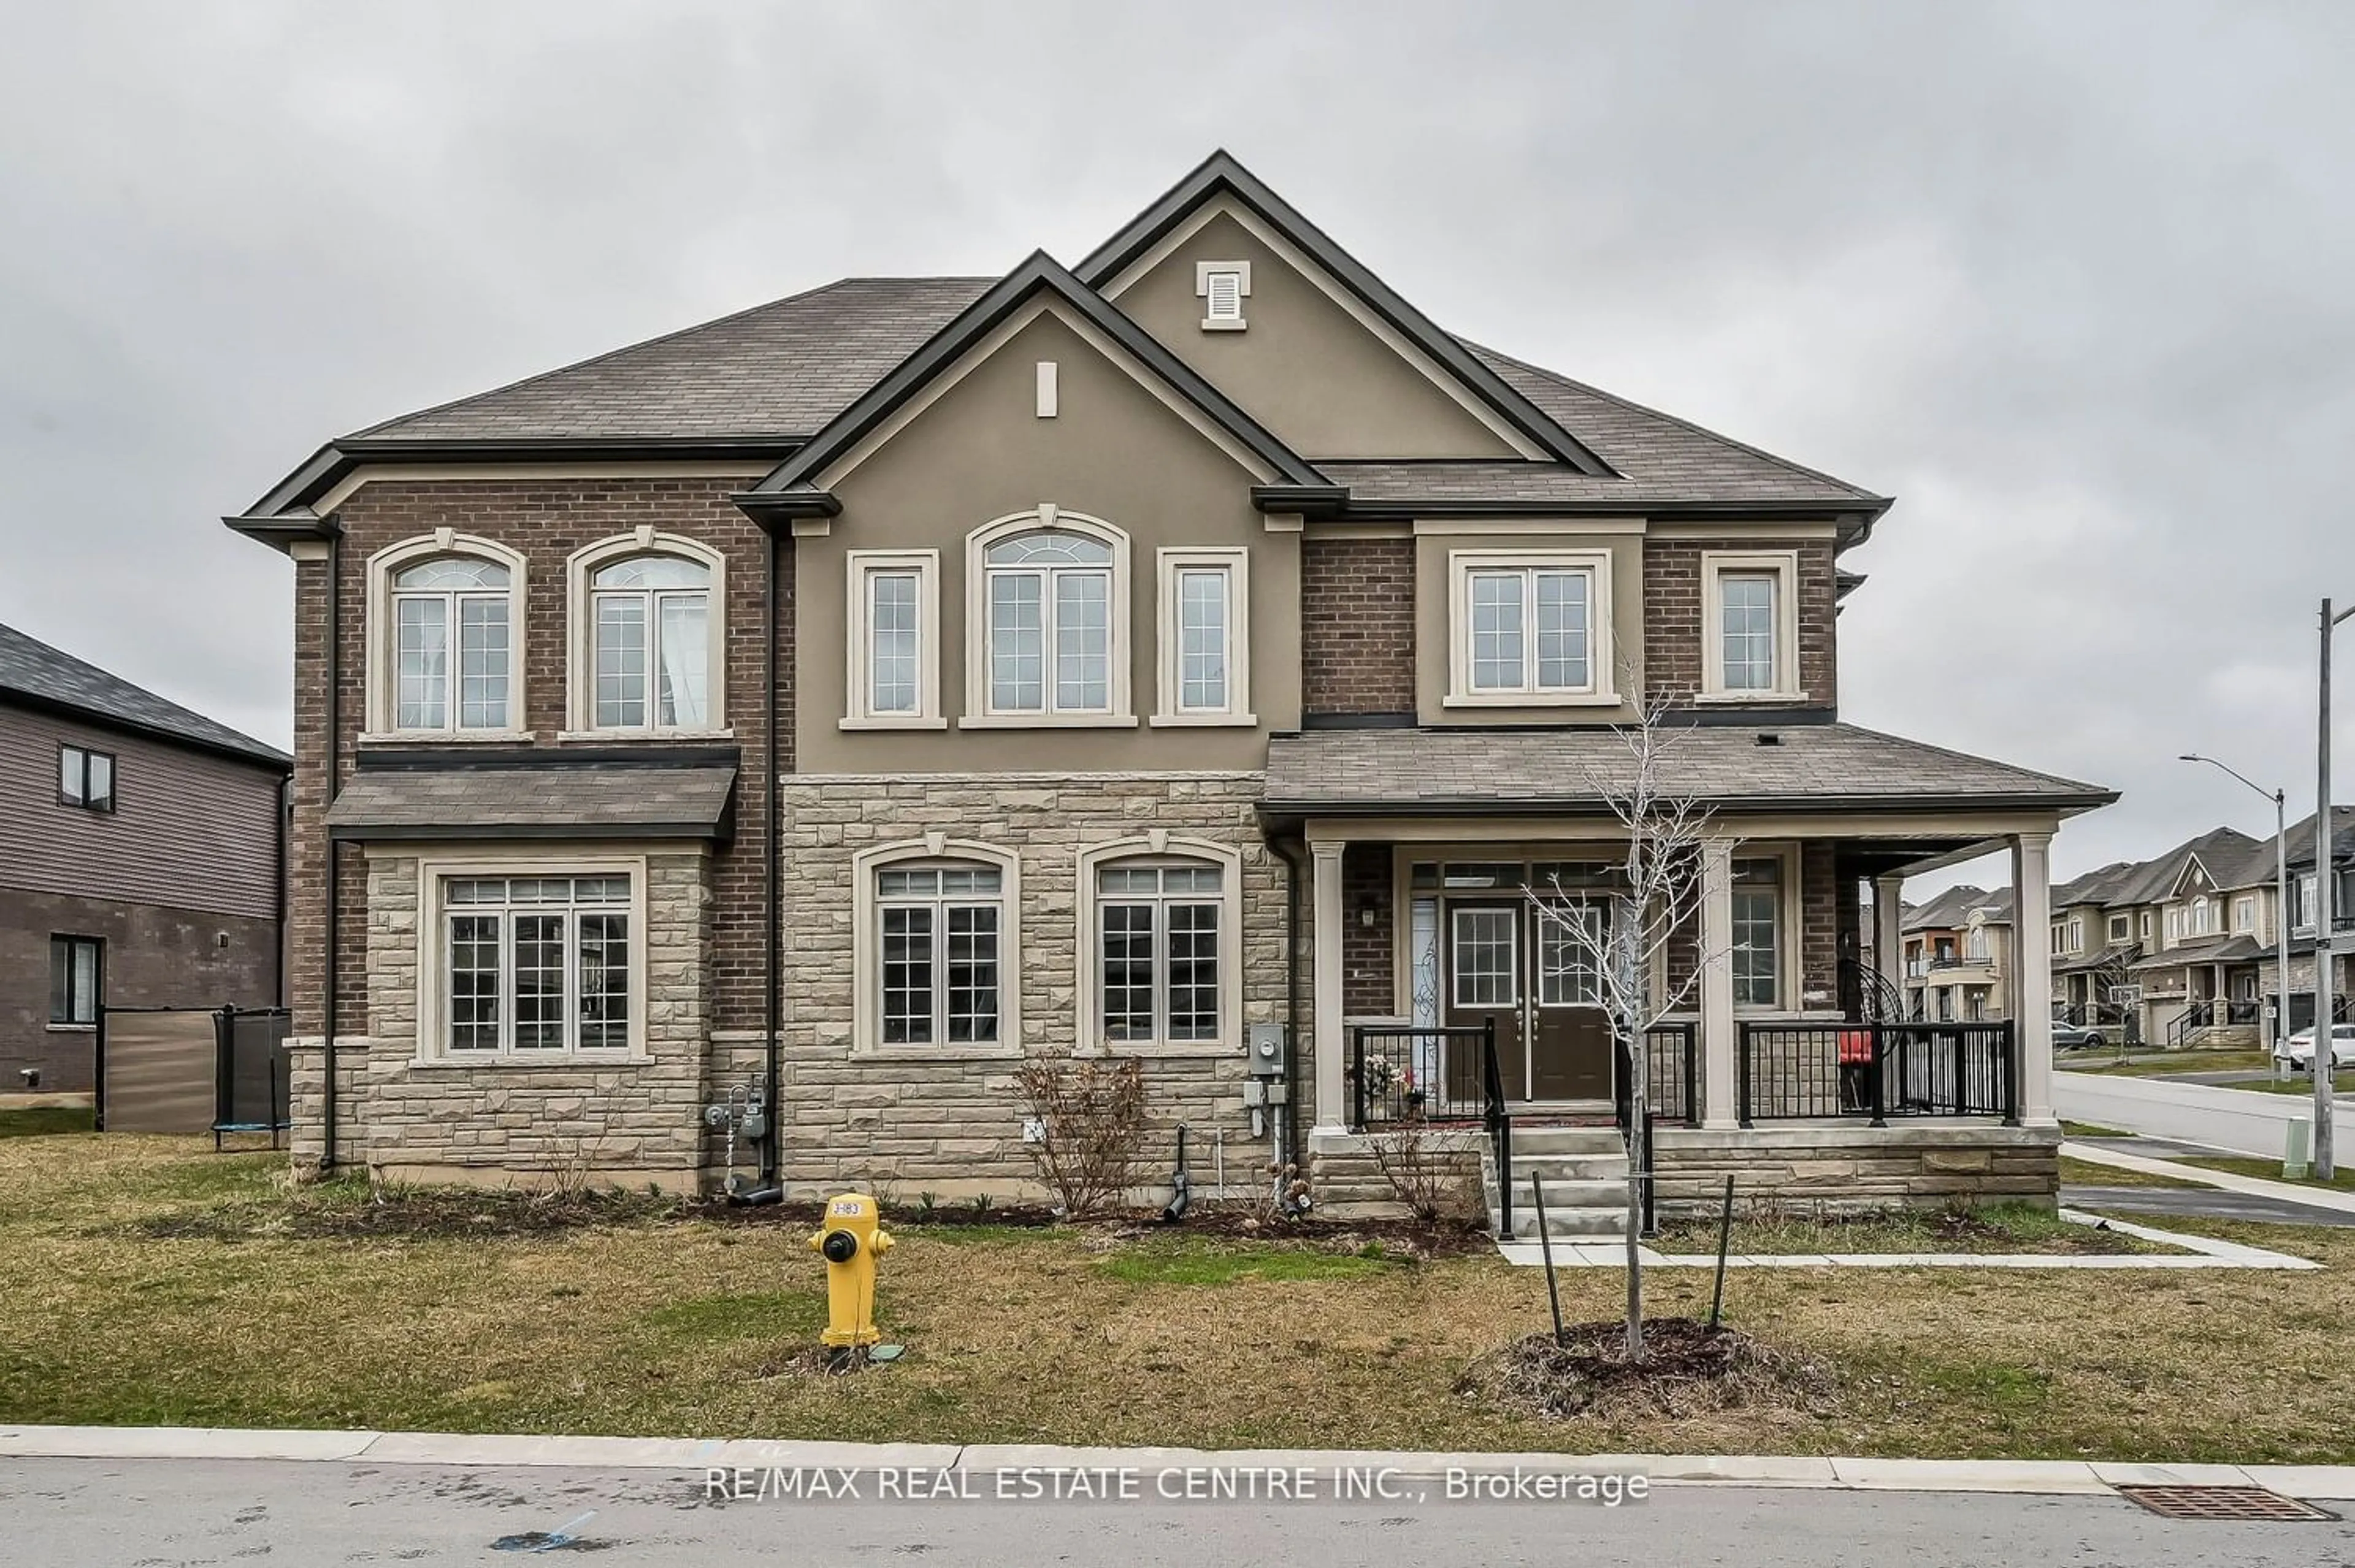 Home with brick exterior material for 29 Doug Foulds Way, Brant Ontario N3L 3E3